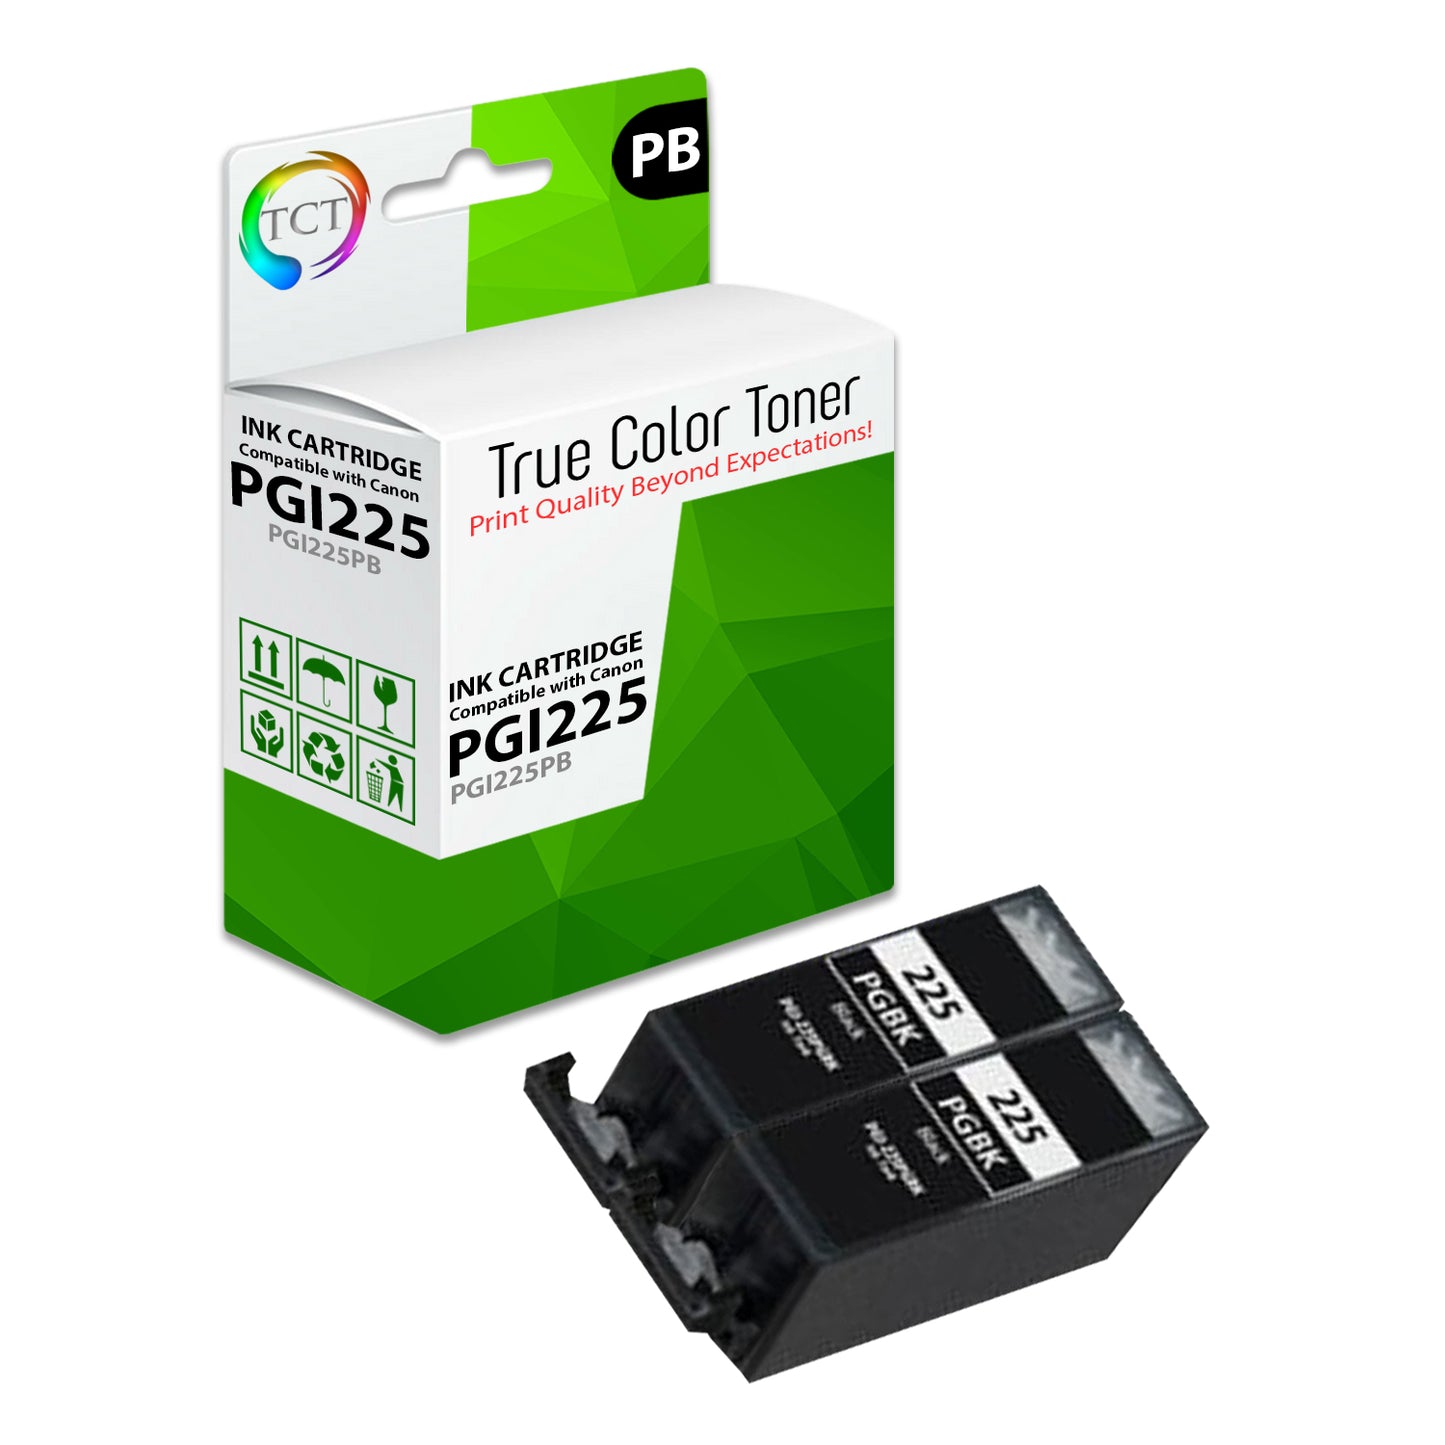 TCT Compatible Ink Cartridge Replacement for the Canon PGI-225 Series - 2 Pack Pigment Black